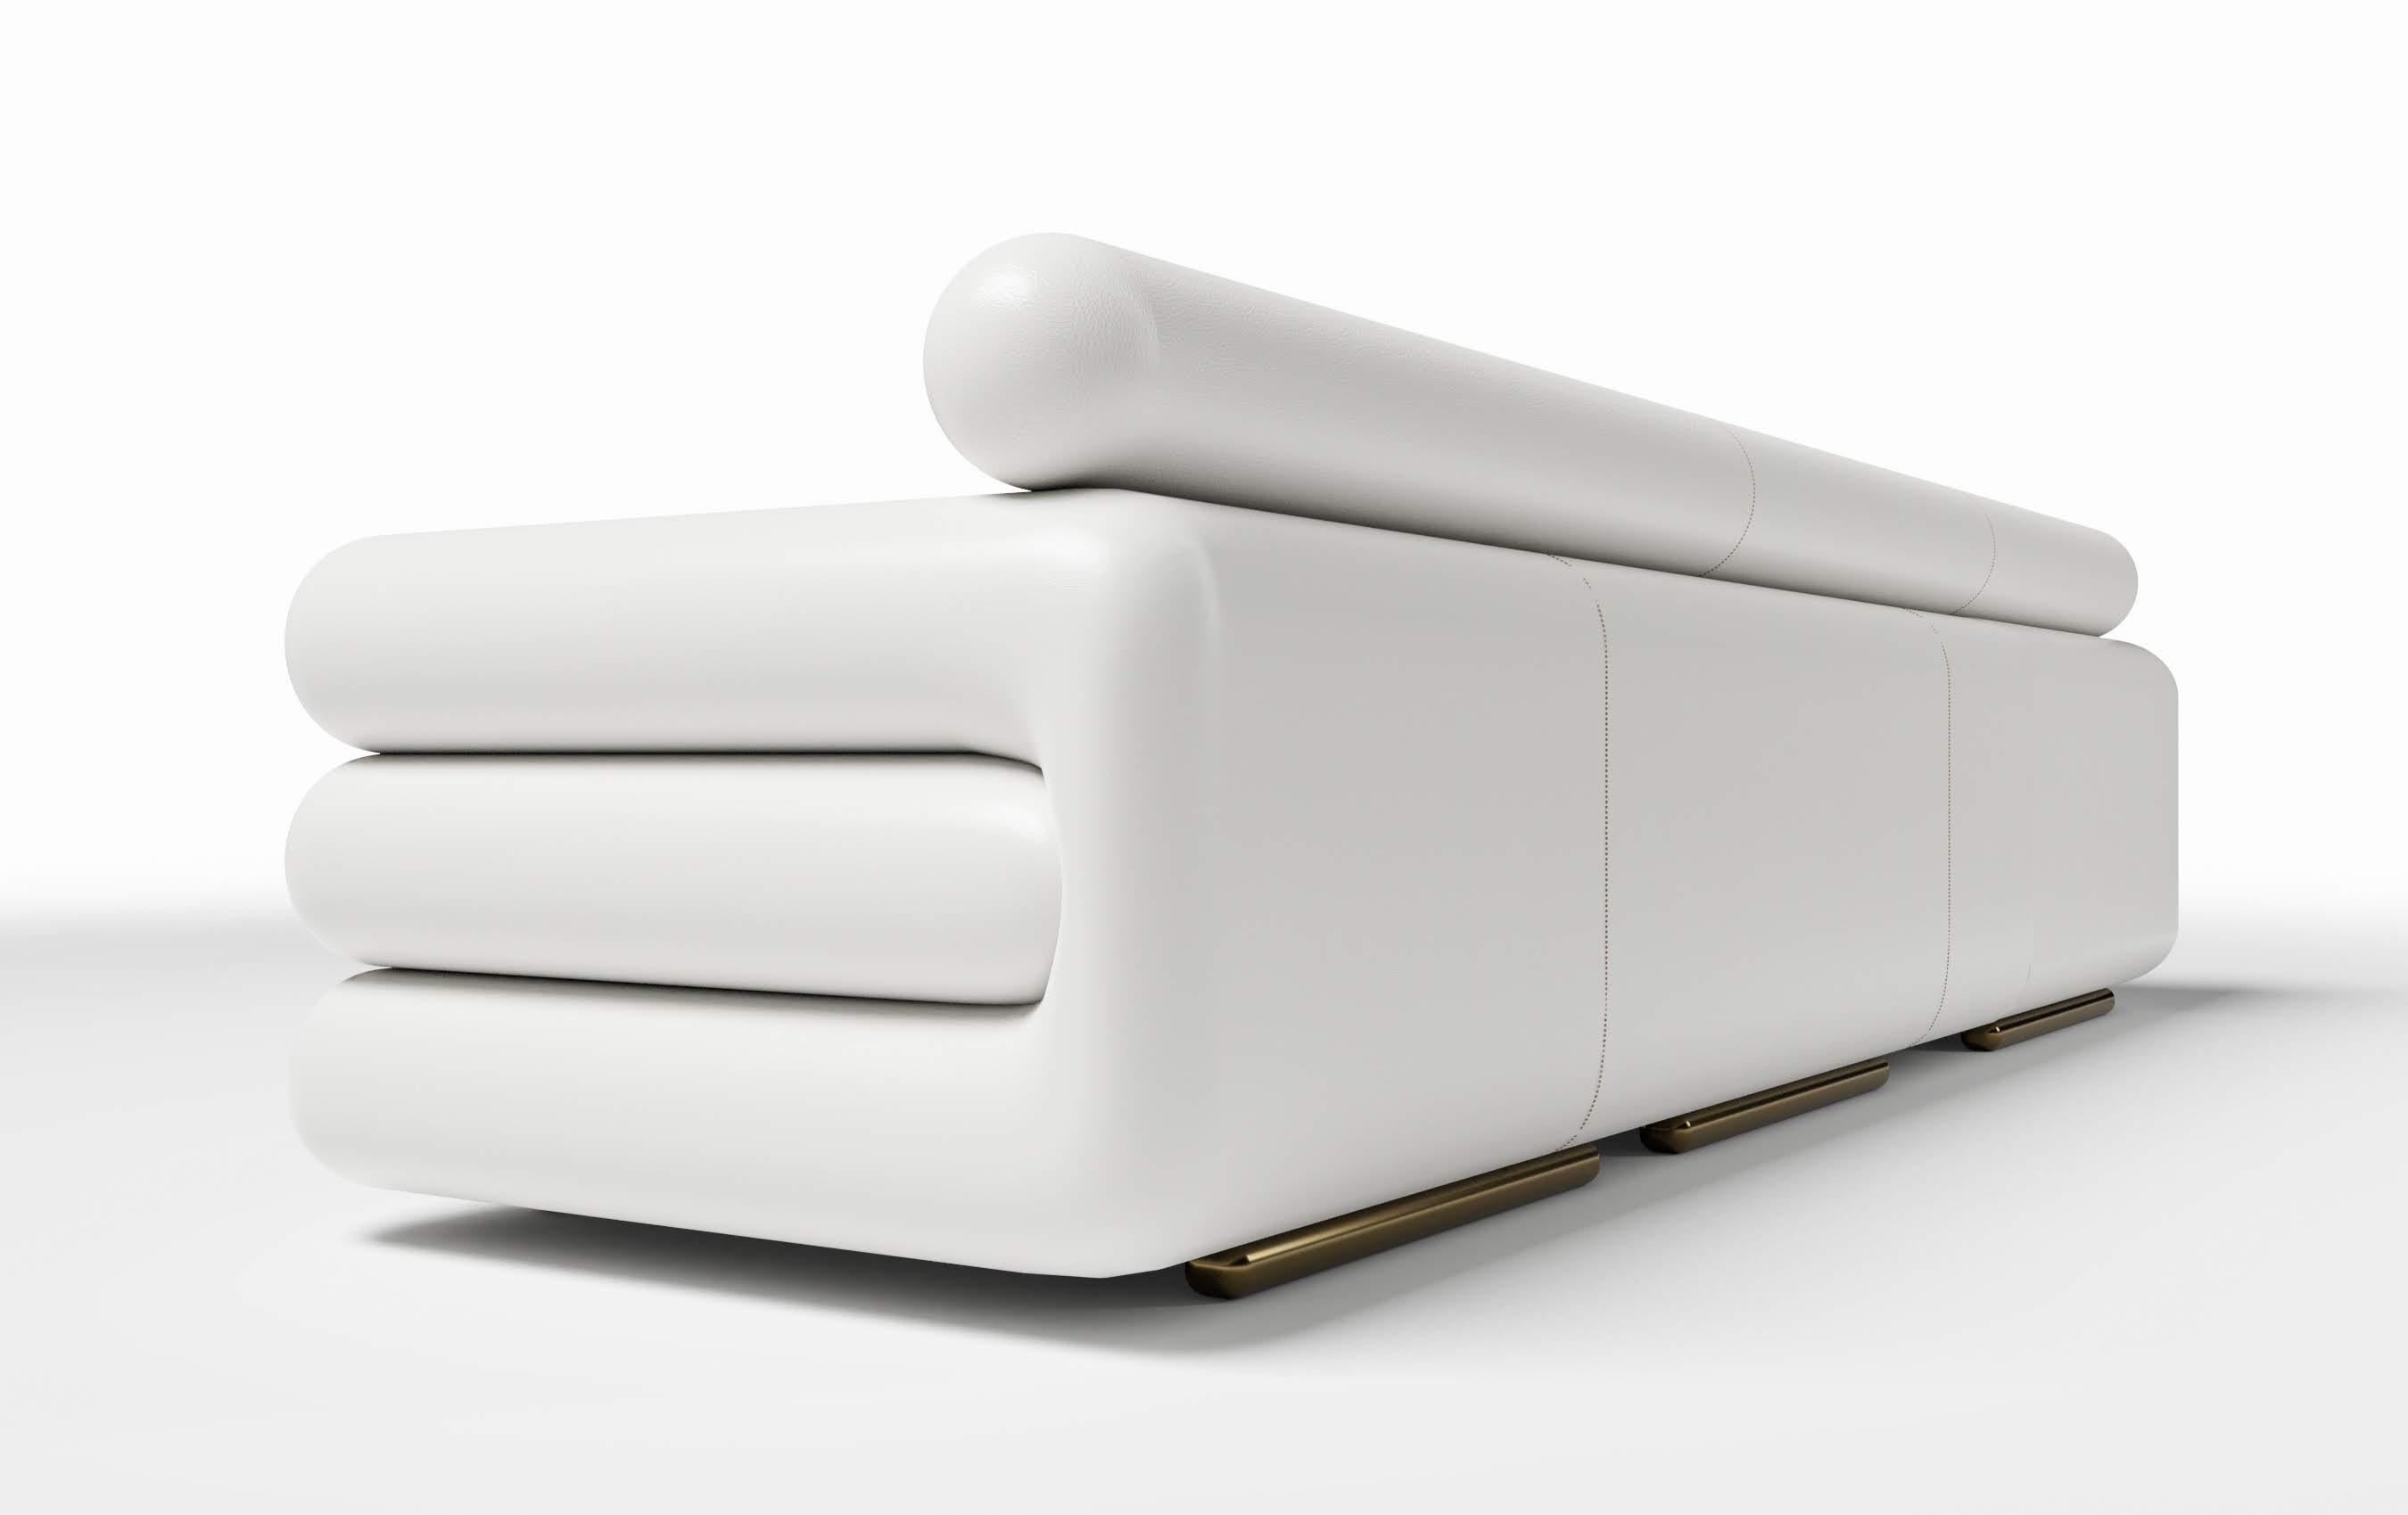 Contemporary TOPANGA SECTIONAL CHAISE - Modern Design in Lealpell Leather and a Metallic Base